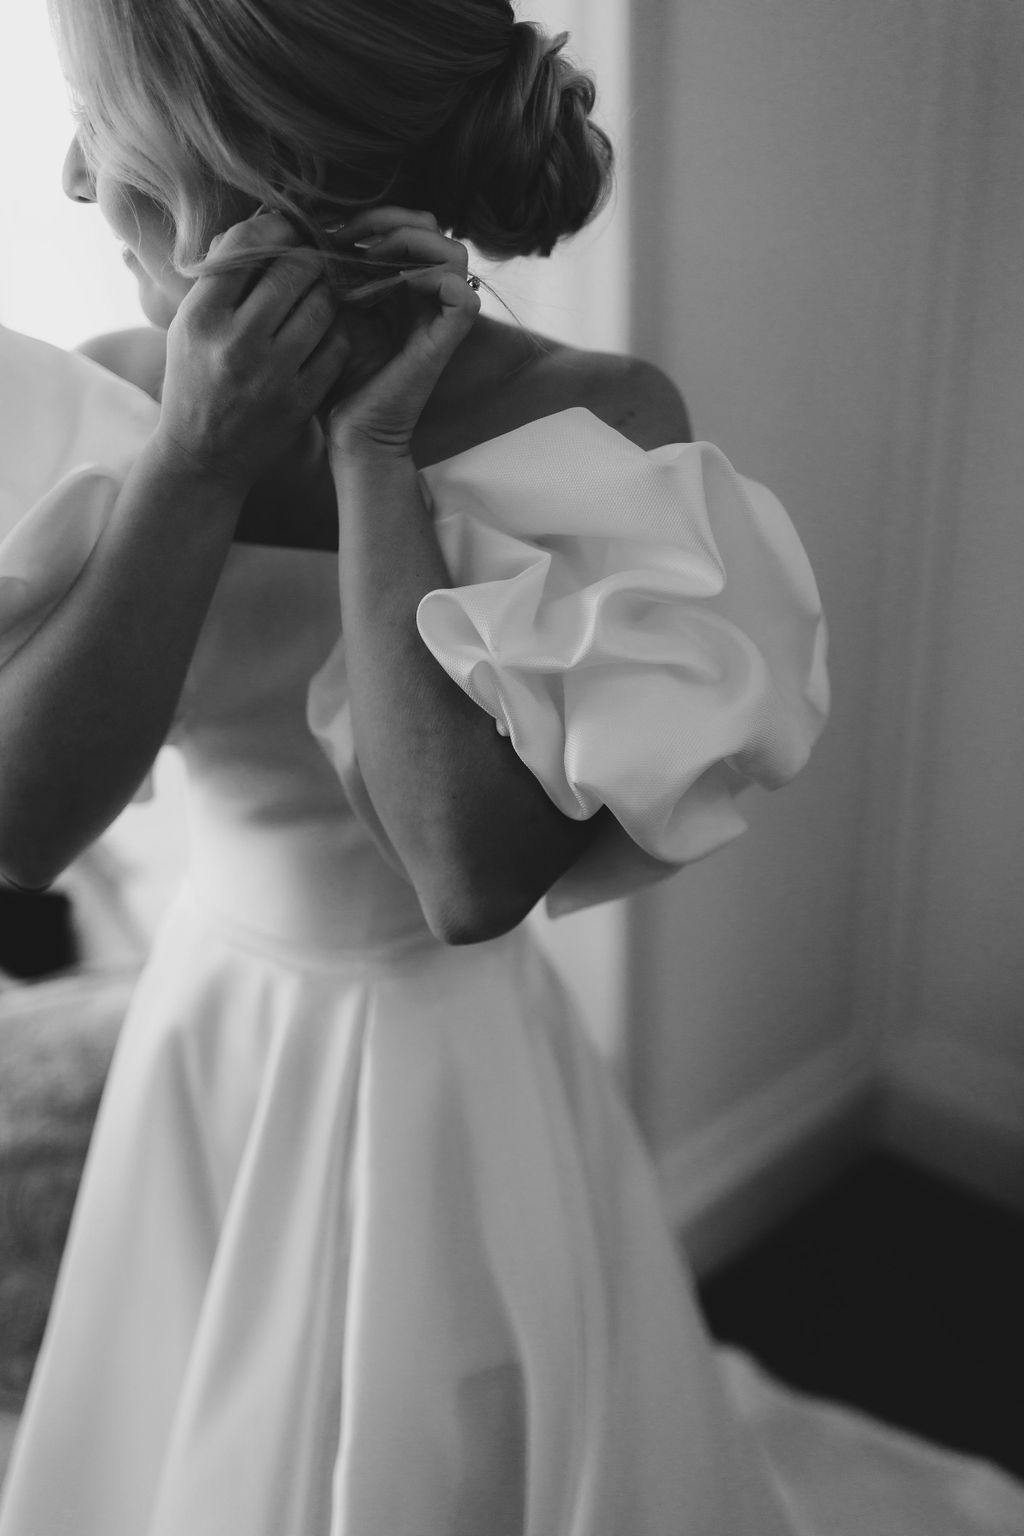 A black and white image of a person in a wedding dress. The dress features elegant, puffy sleeves and a fitted bodice. The person is adjusting an earring and looking away from the camera, with their hair styled in an updo. The background is softly lit.